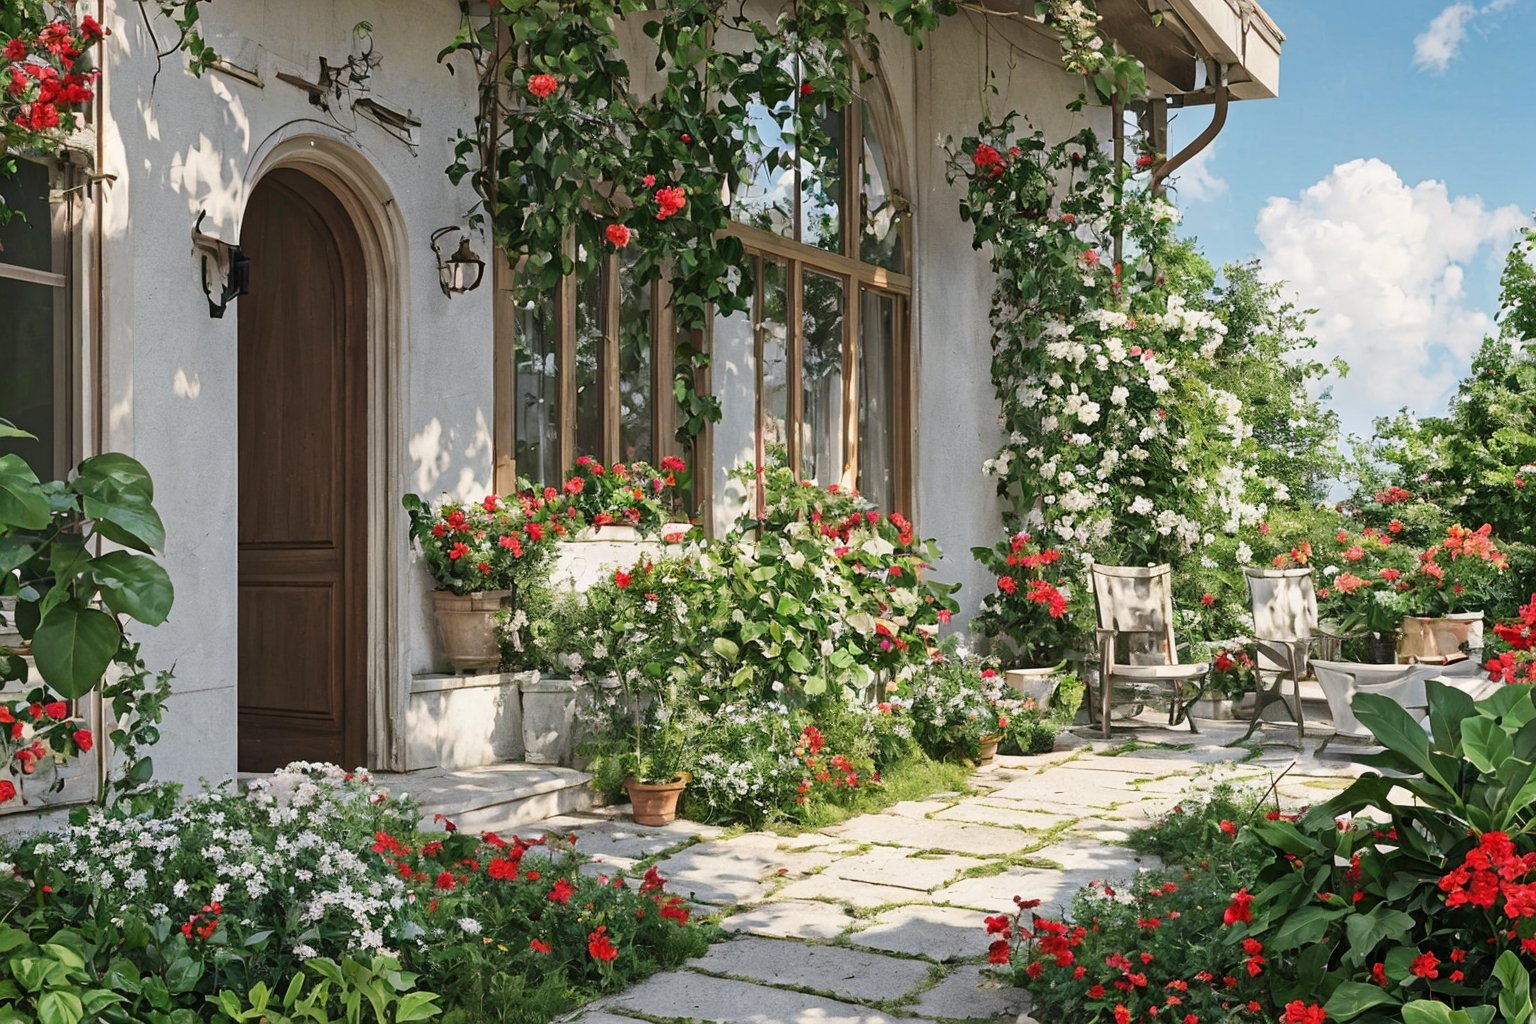 Villa,lots of blooming roses,outdoor,sky,sky,clouds,trees,blue sky,no people,leaves,chairs,grass,plants,red flowers,architecture,landscape,doors,potted plants,shrubs,house,garden,HD,16k,garden design,